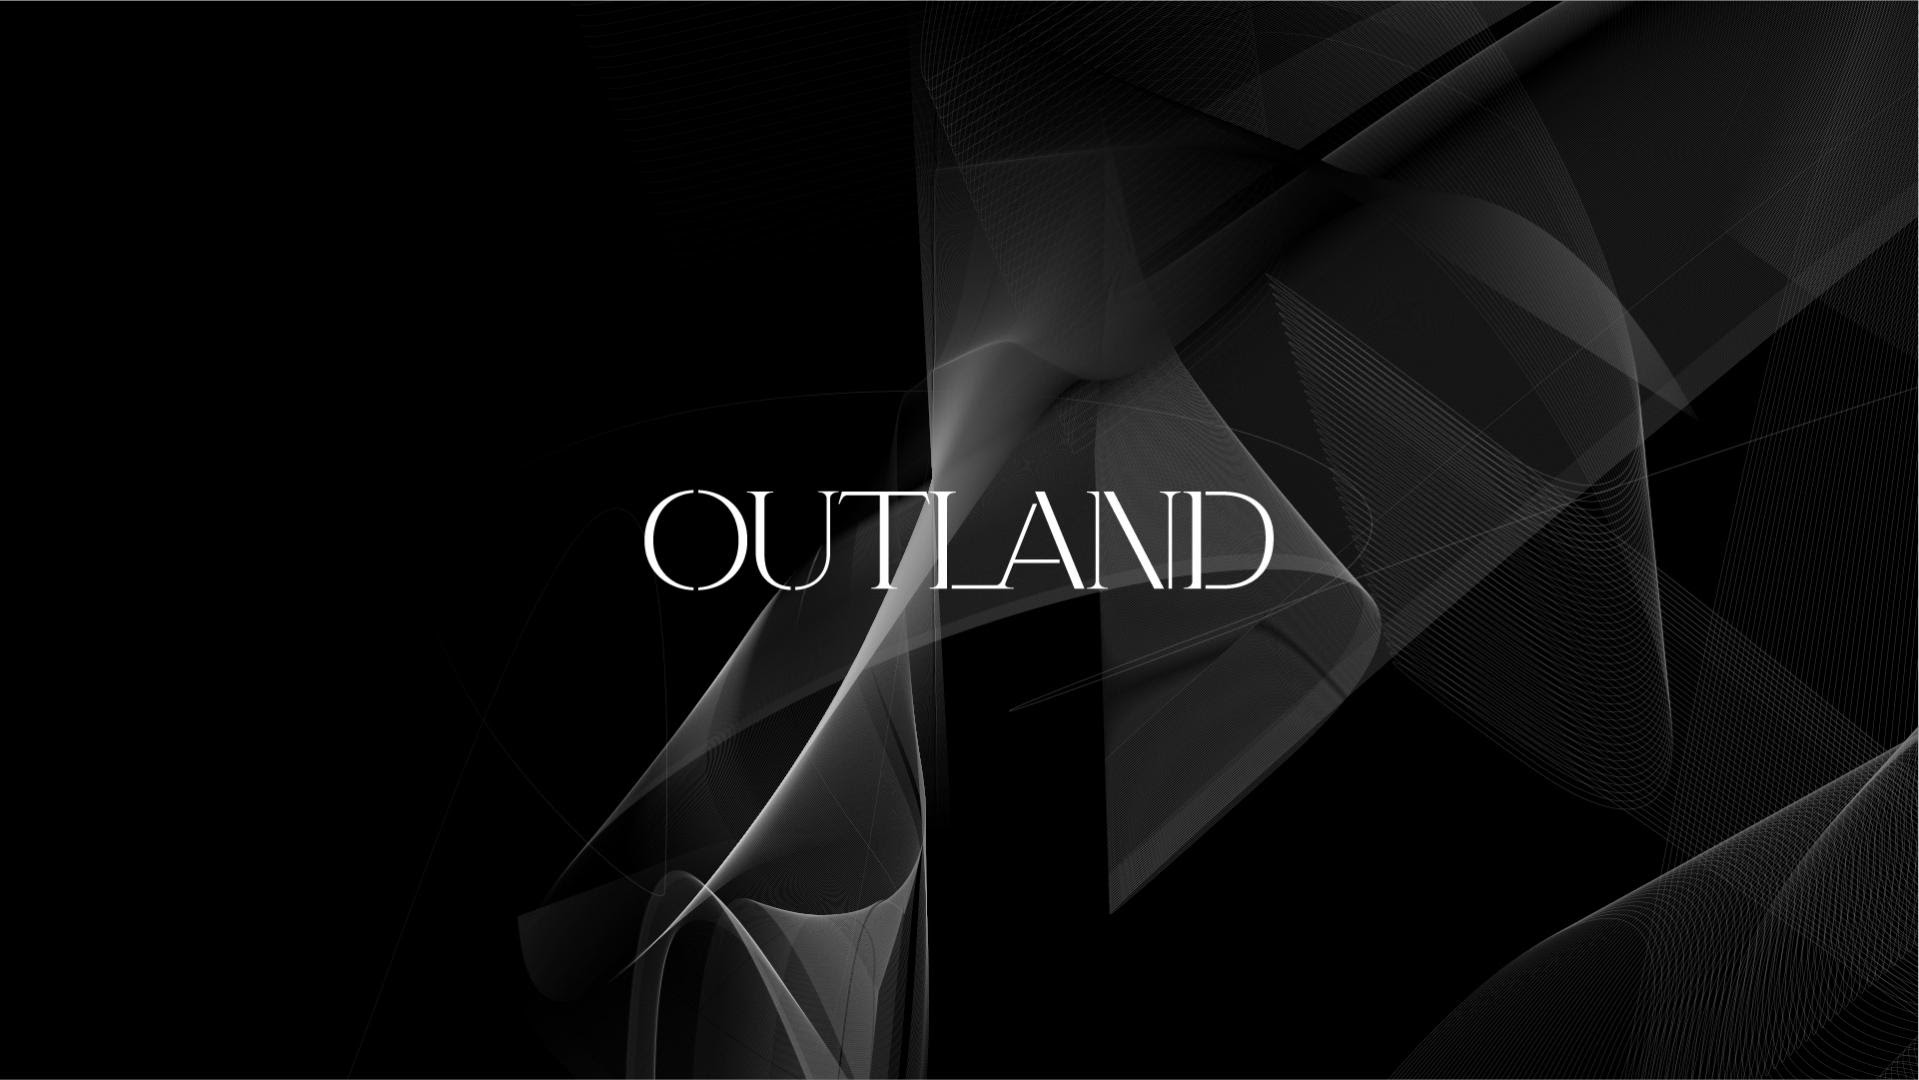 Crypto Art Platform Outland Secures $5M In Its First Seed Round Led by OKG Ventures